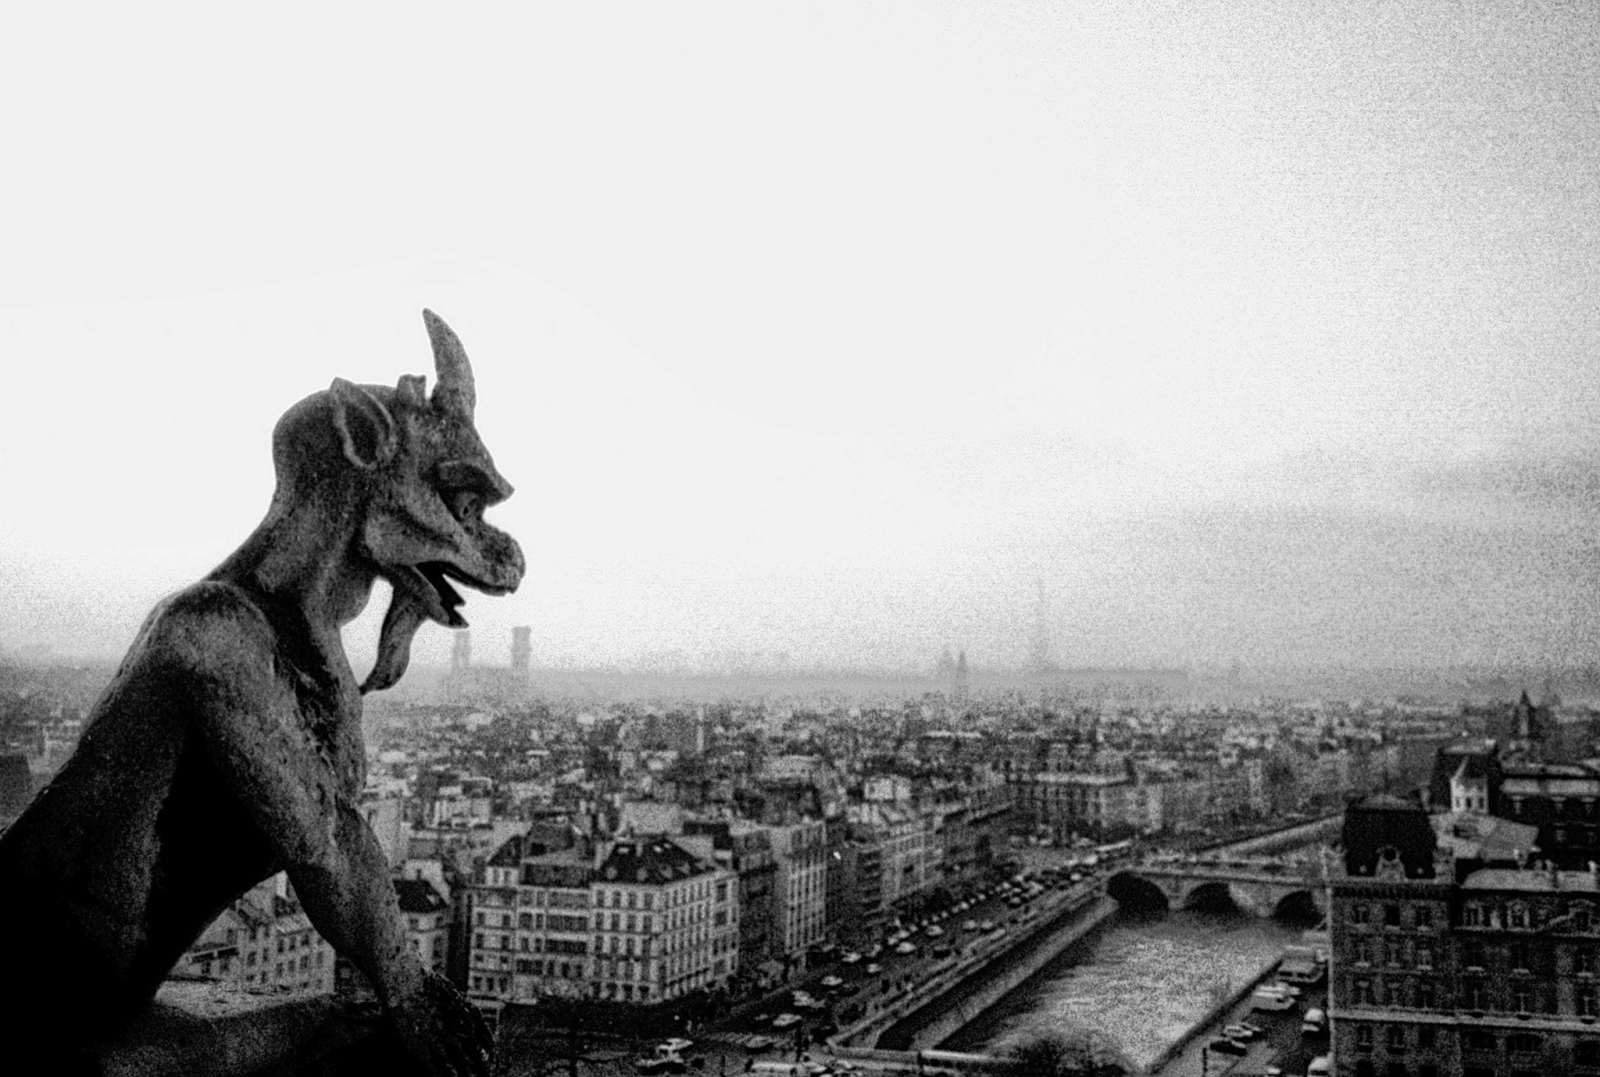  I see Notre Dame is on fire and_irca 1985. Zorki IV, Tri-x 400. 